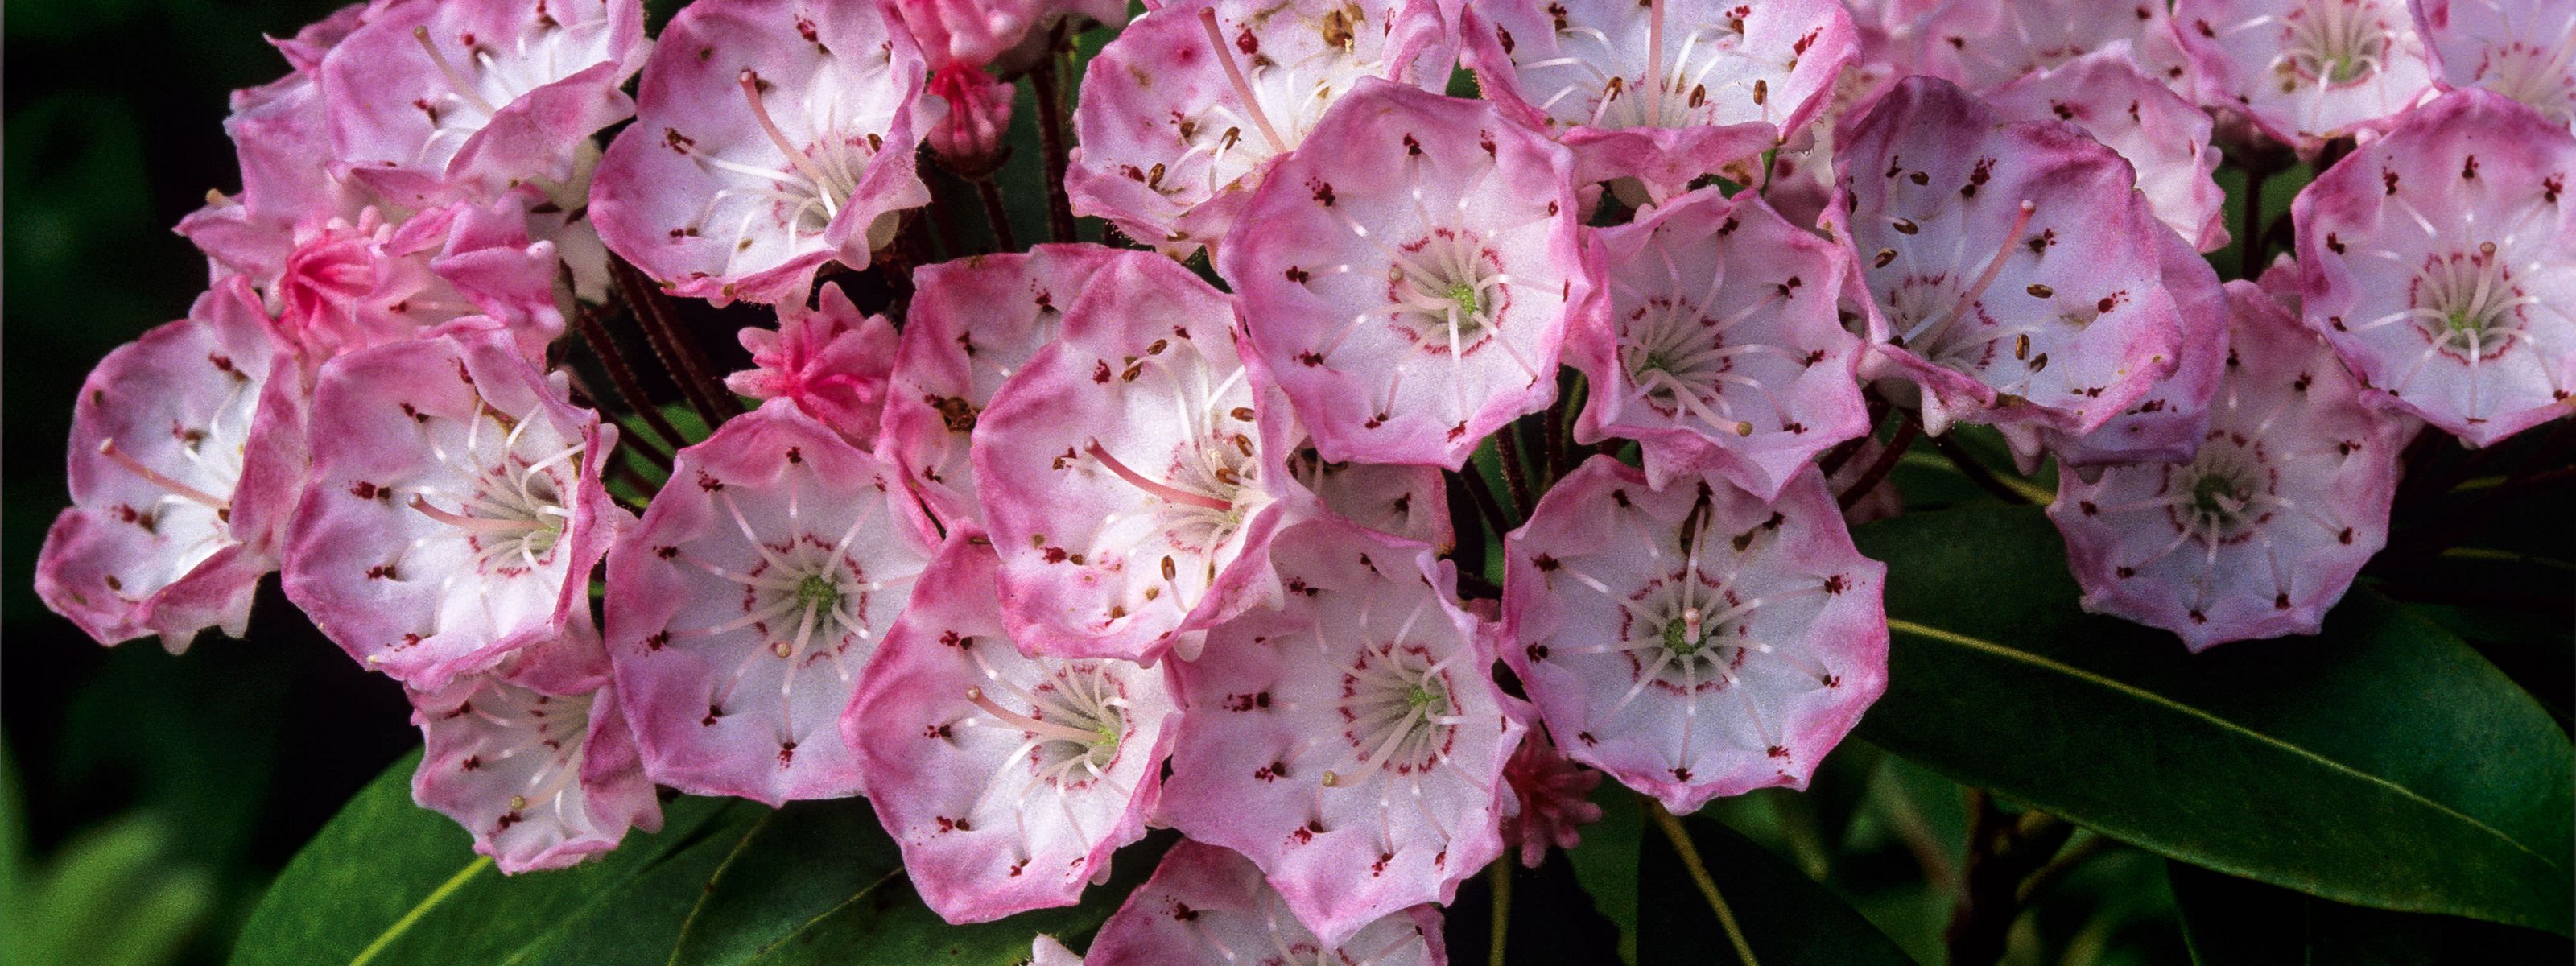 Closeup of pink flowers with white centers.